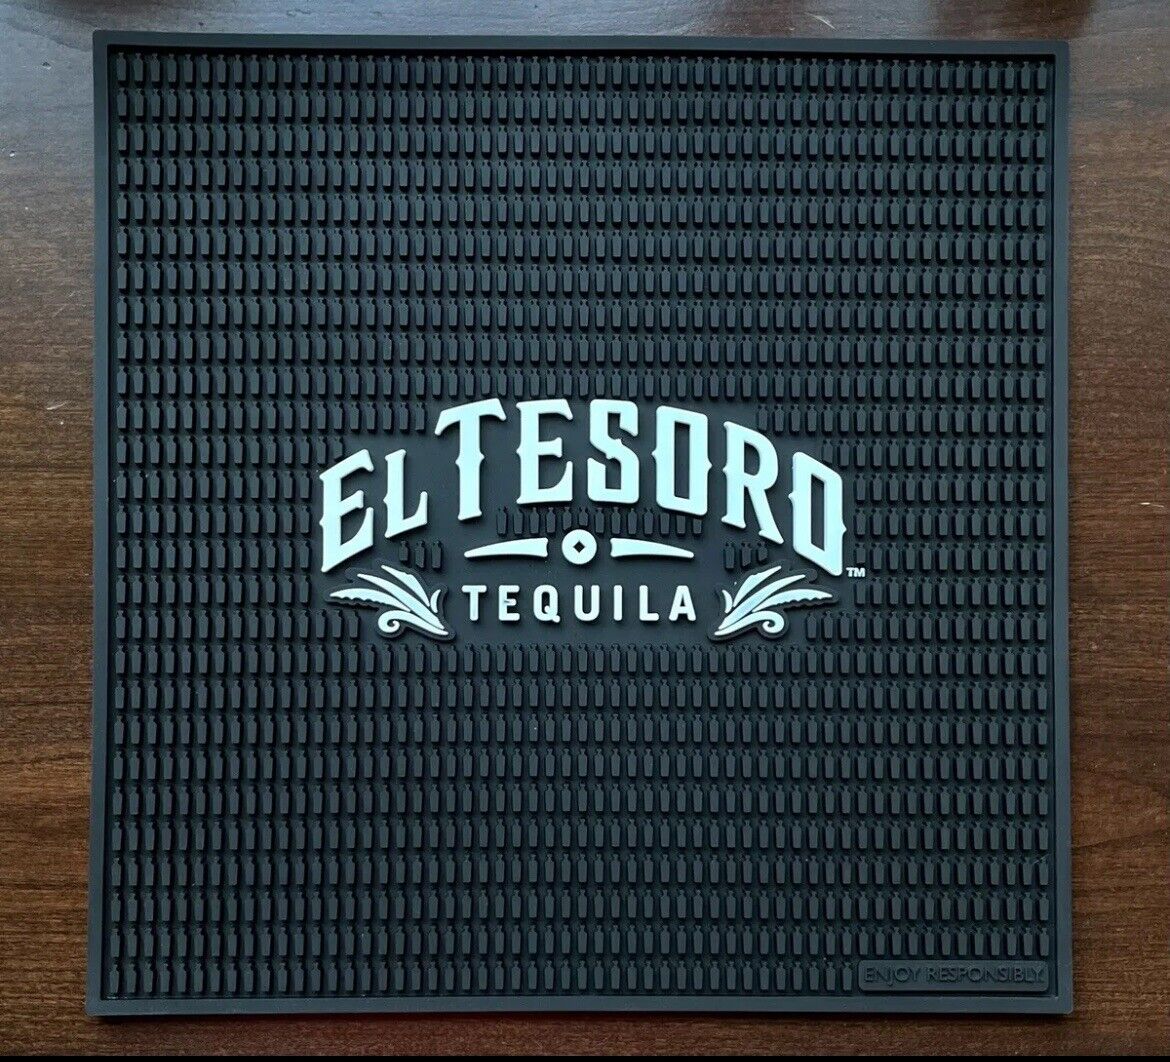 EL TESORO TEQUILA *BRAND NEW* Rubber Service/Wait Station Square Spill Mat 14x14